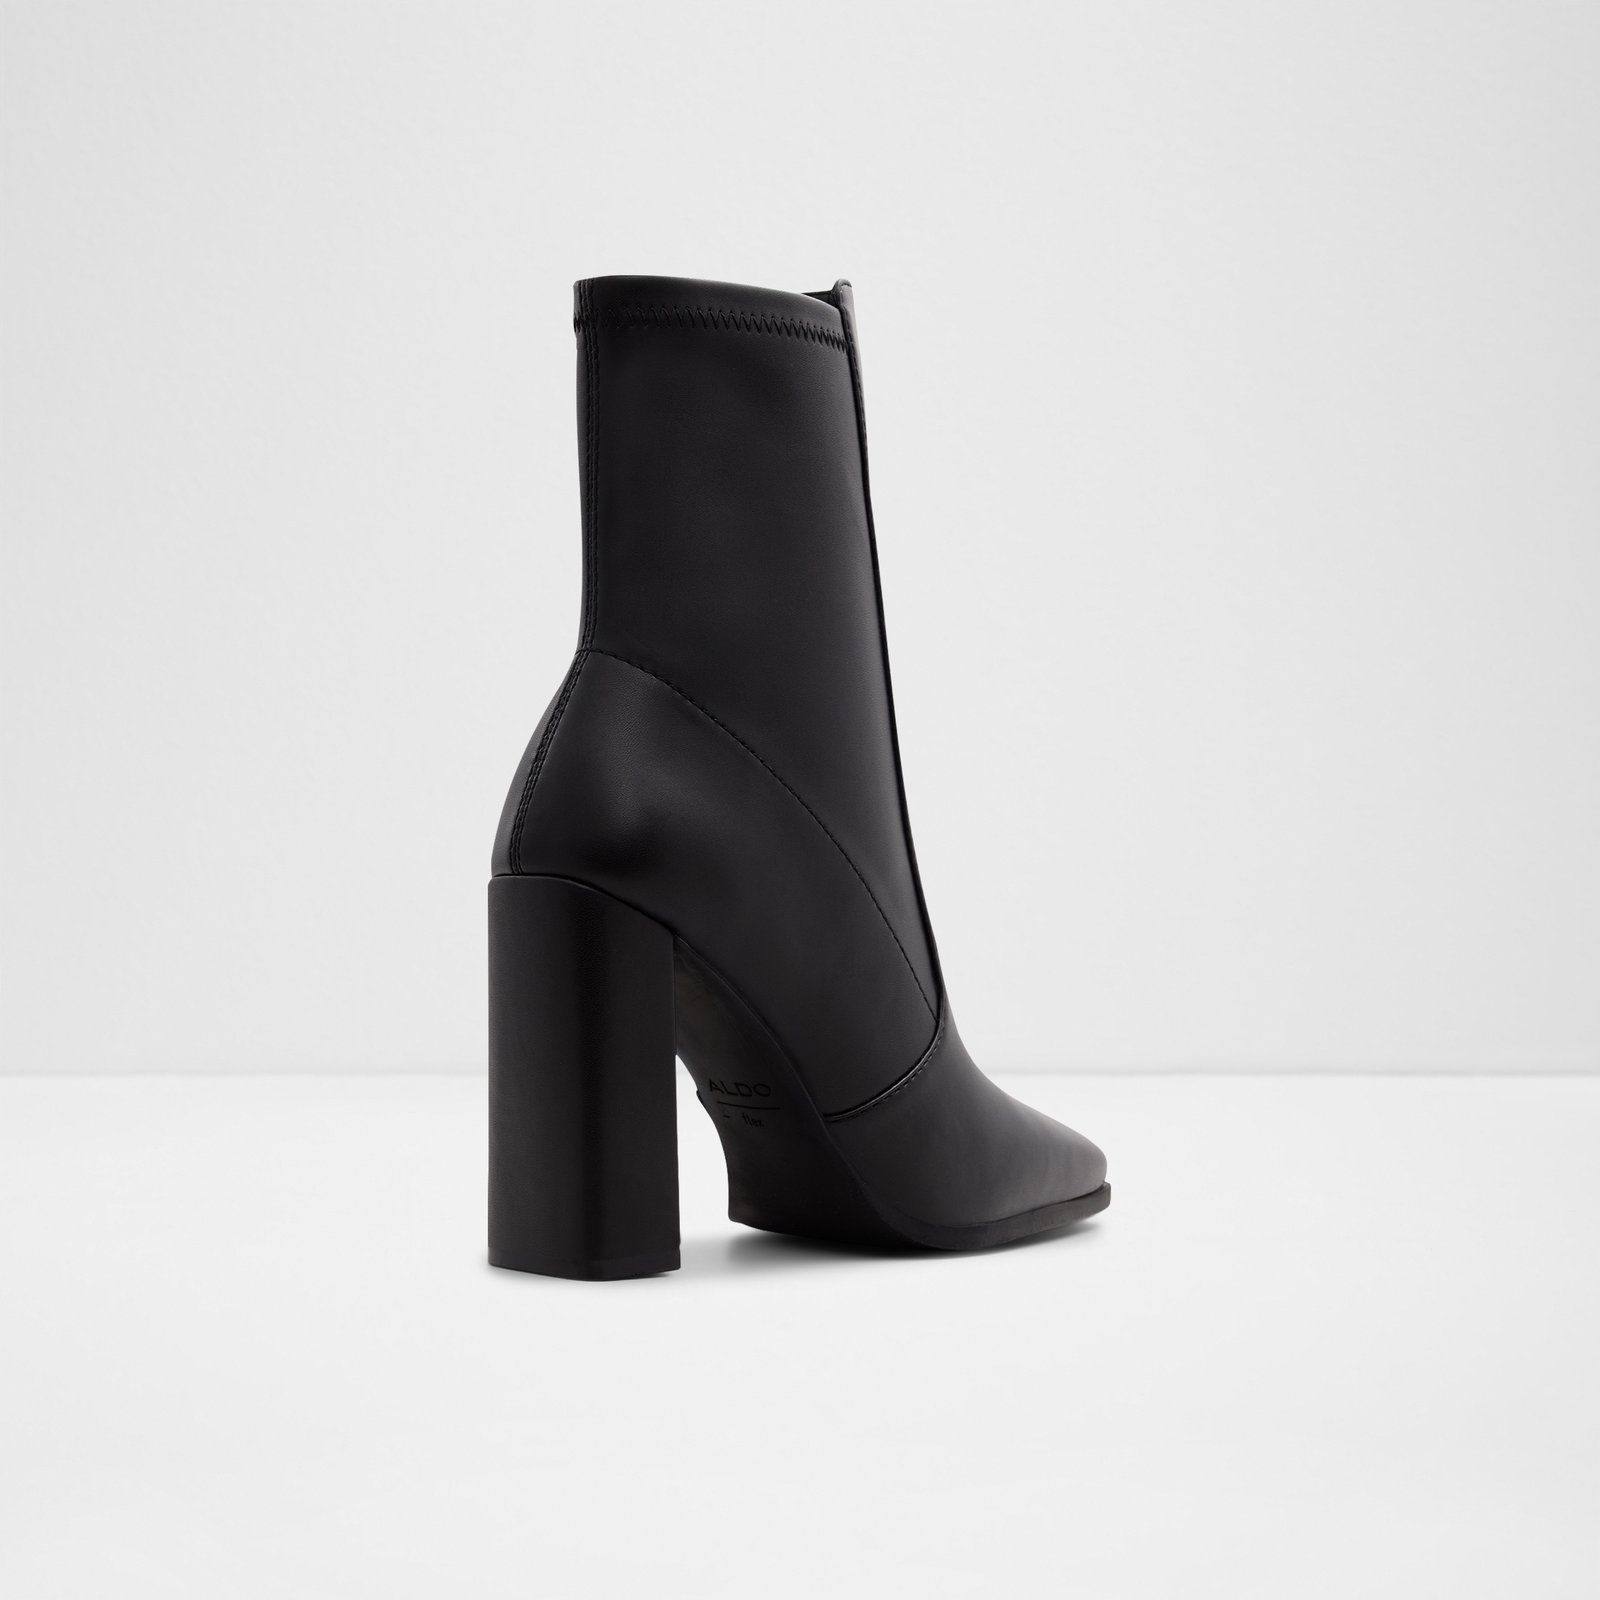 Audrella Black Synthetic Smooth Women's Dress & Heeled Boots | ALDO US